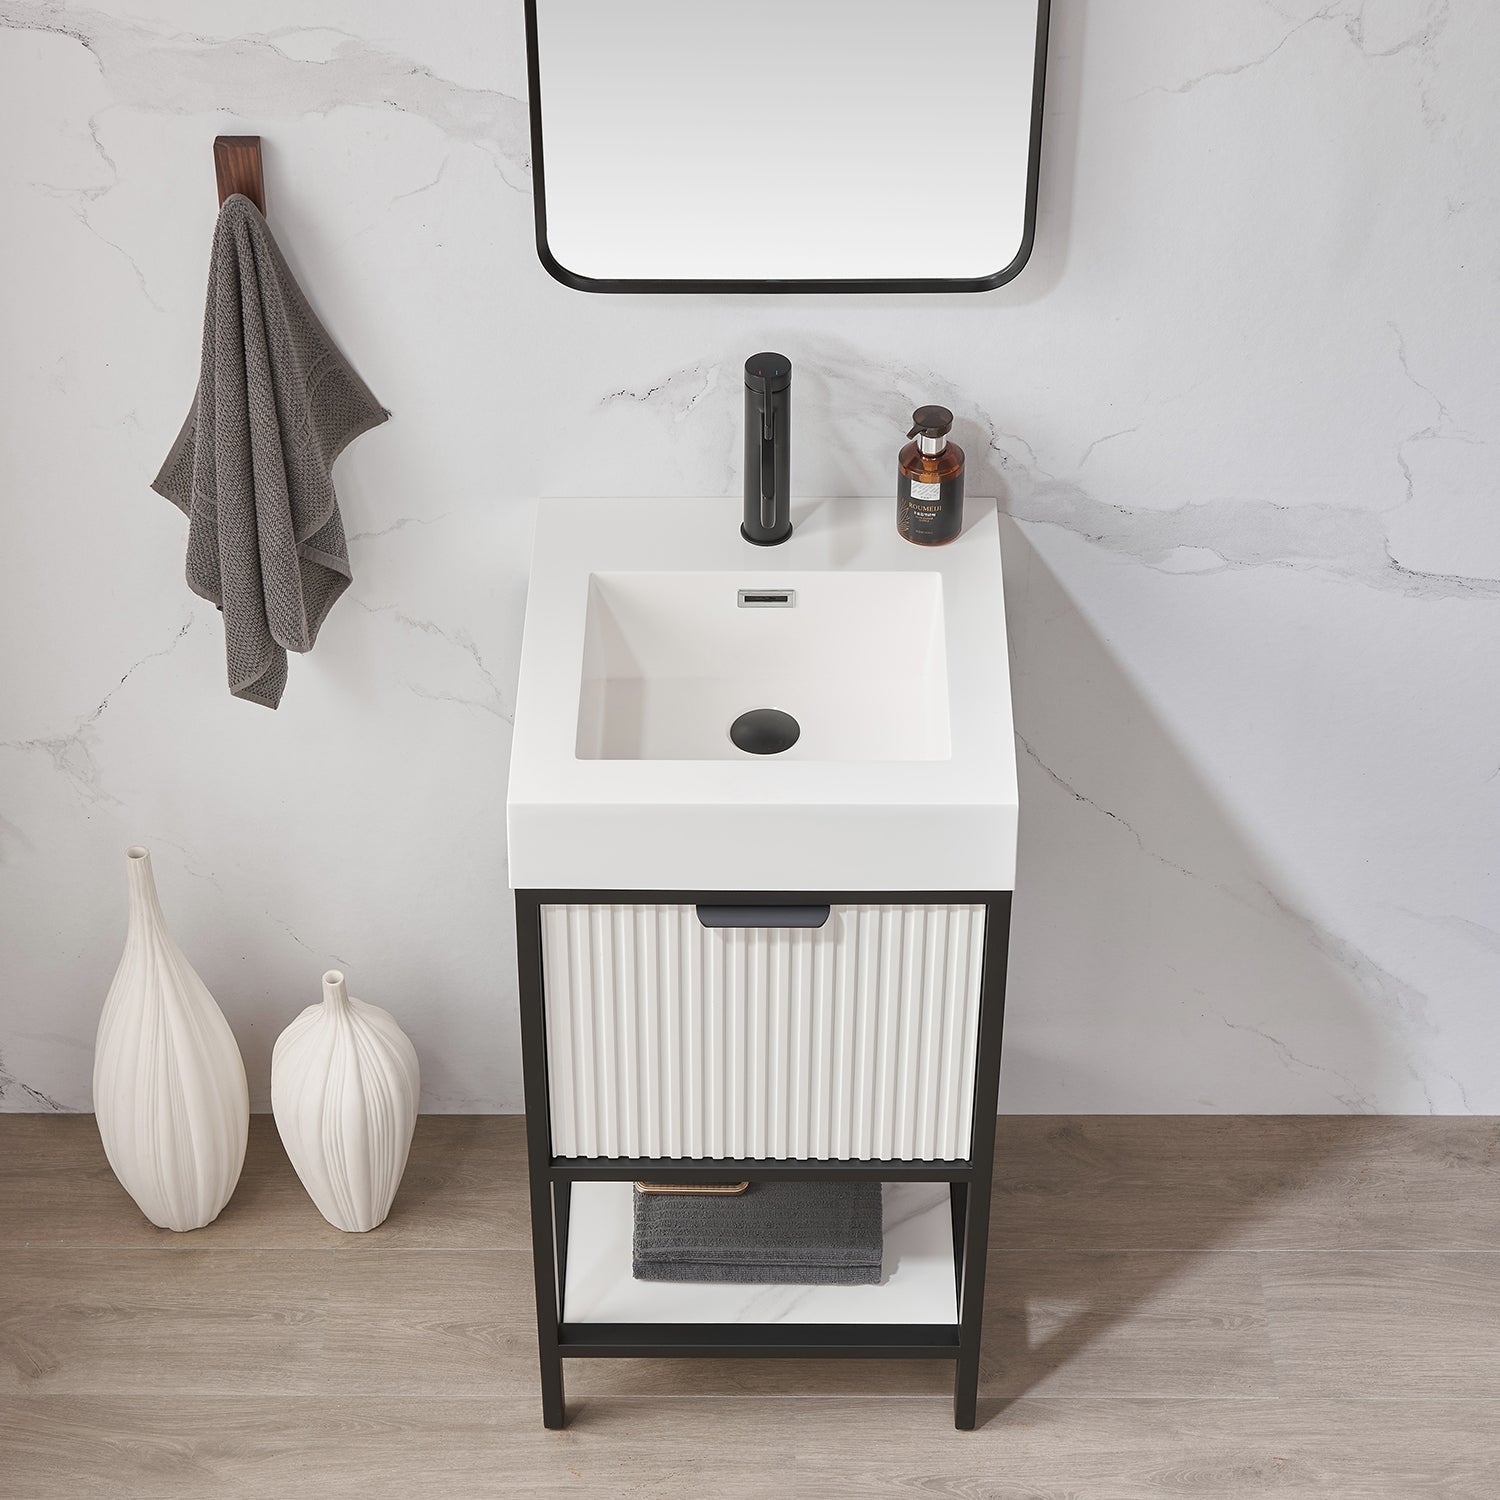 Vinnova Design Marcilla 18" Single Sink Bath Vanity in White with One Piece Composite Stone Sink Top - New Star Living